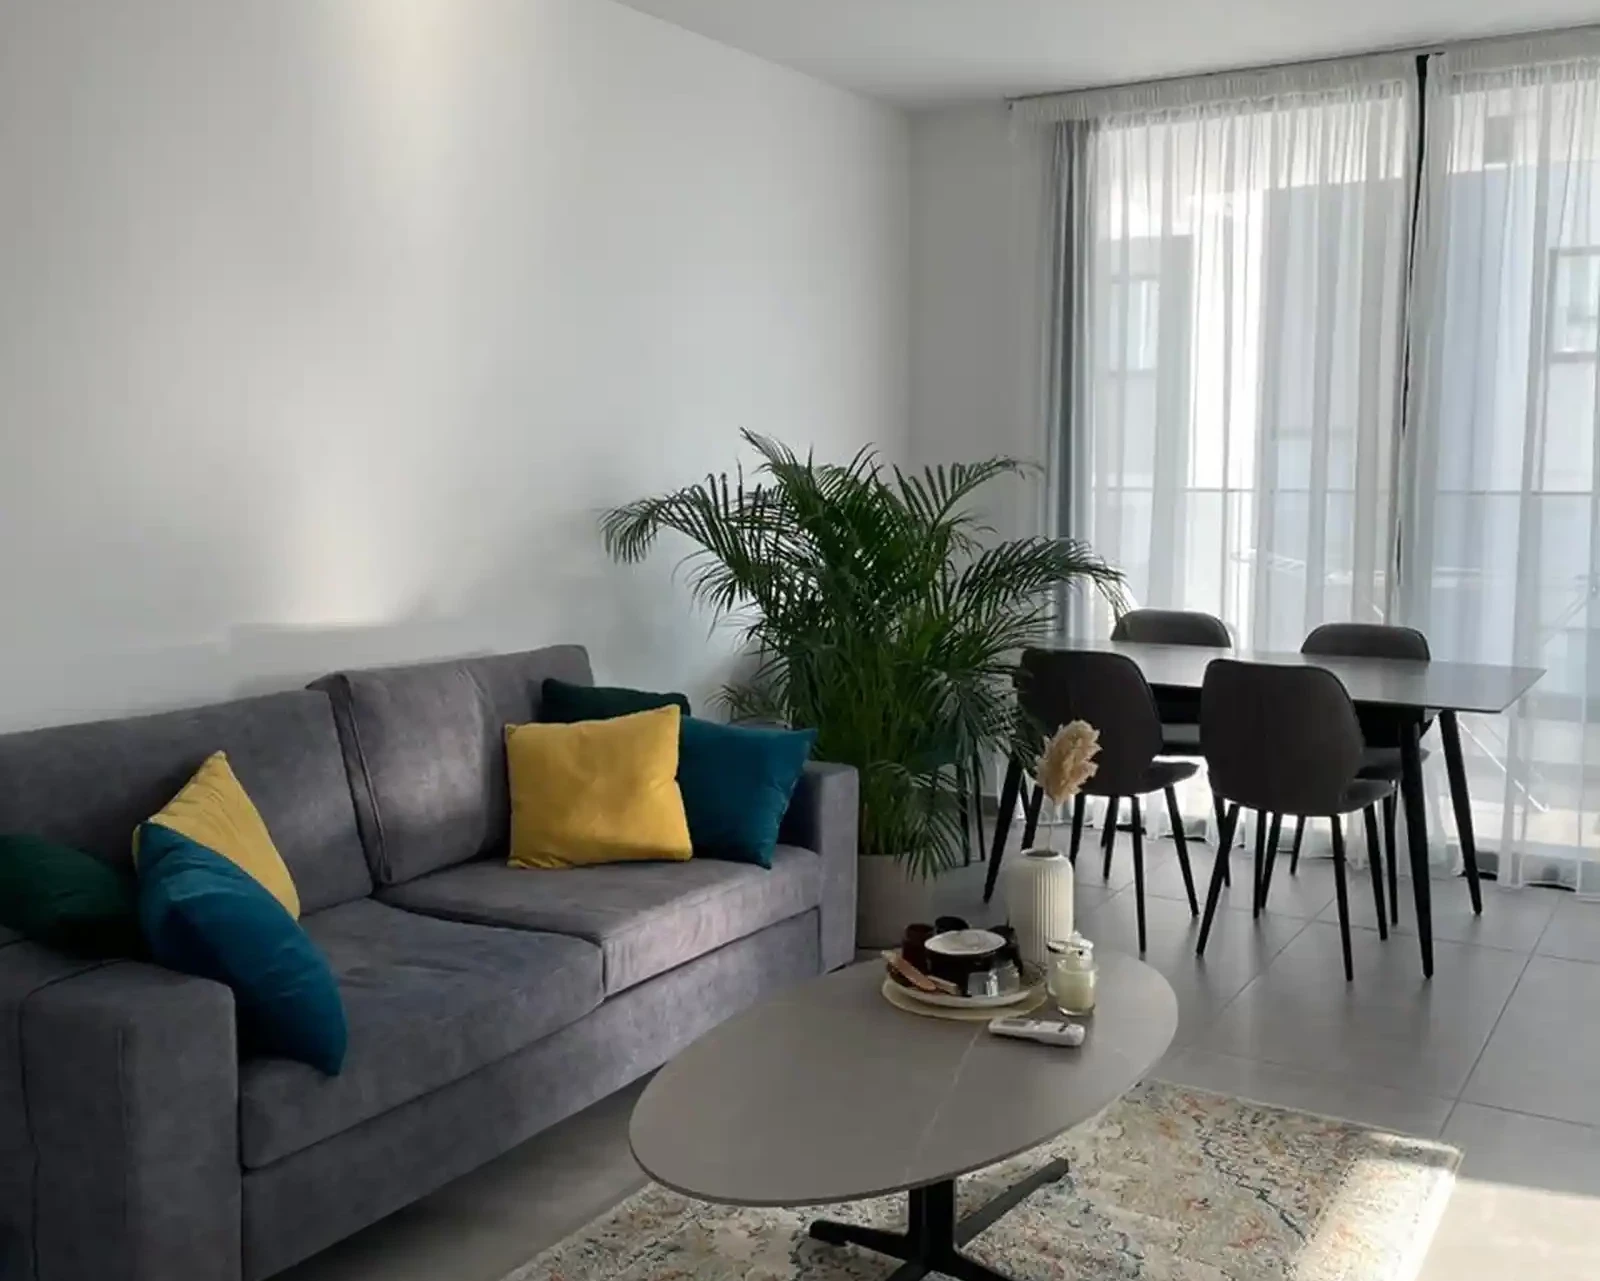 2-bedroom apartment to rent €2.200, image 1